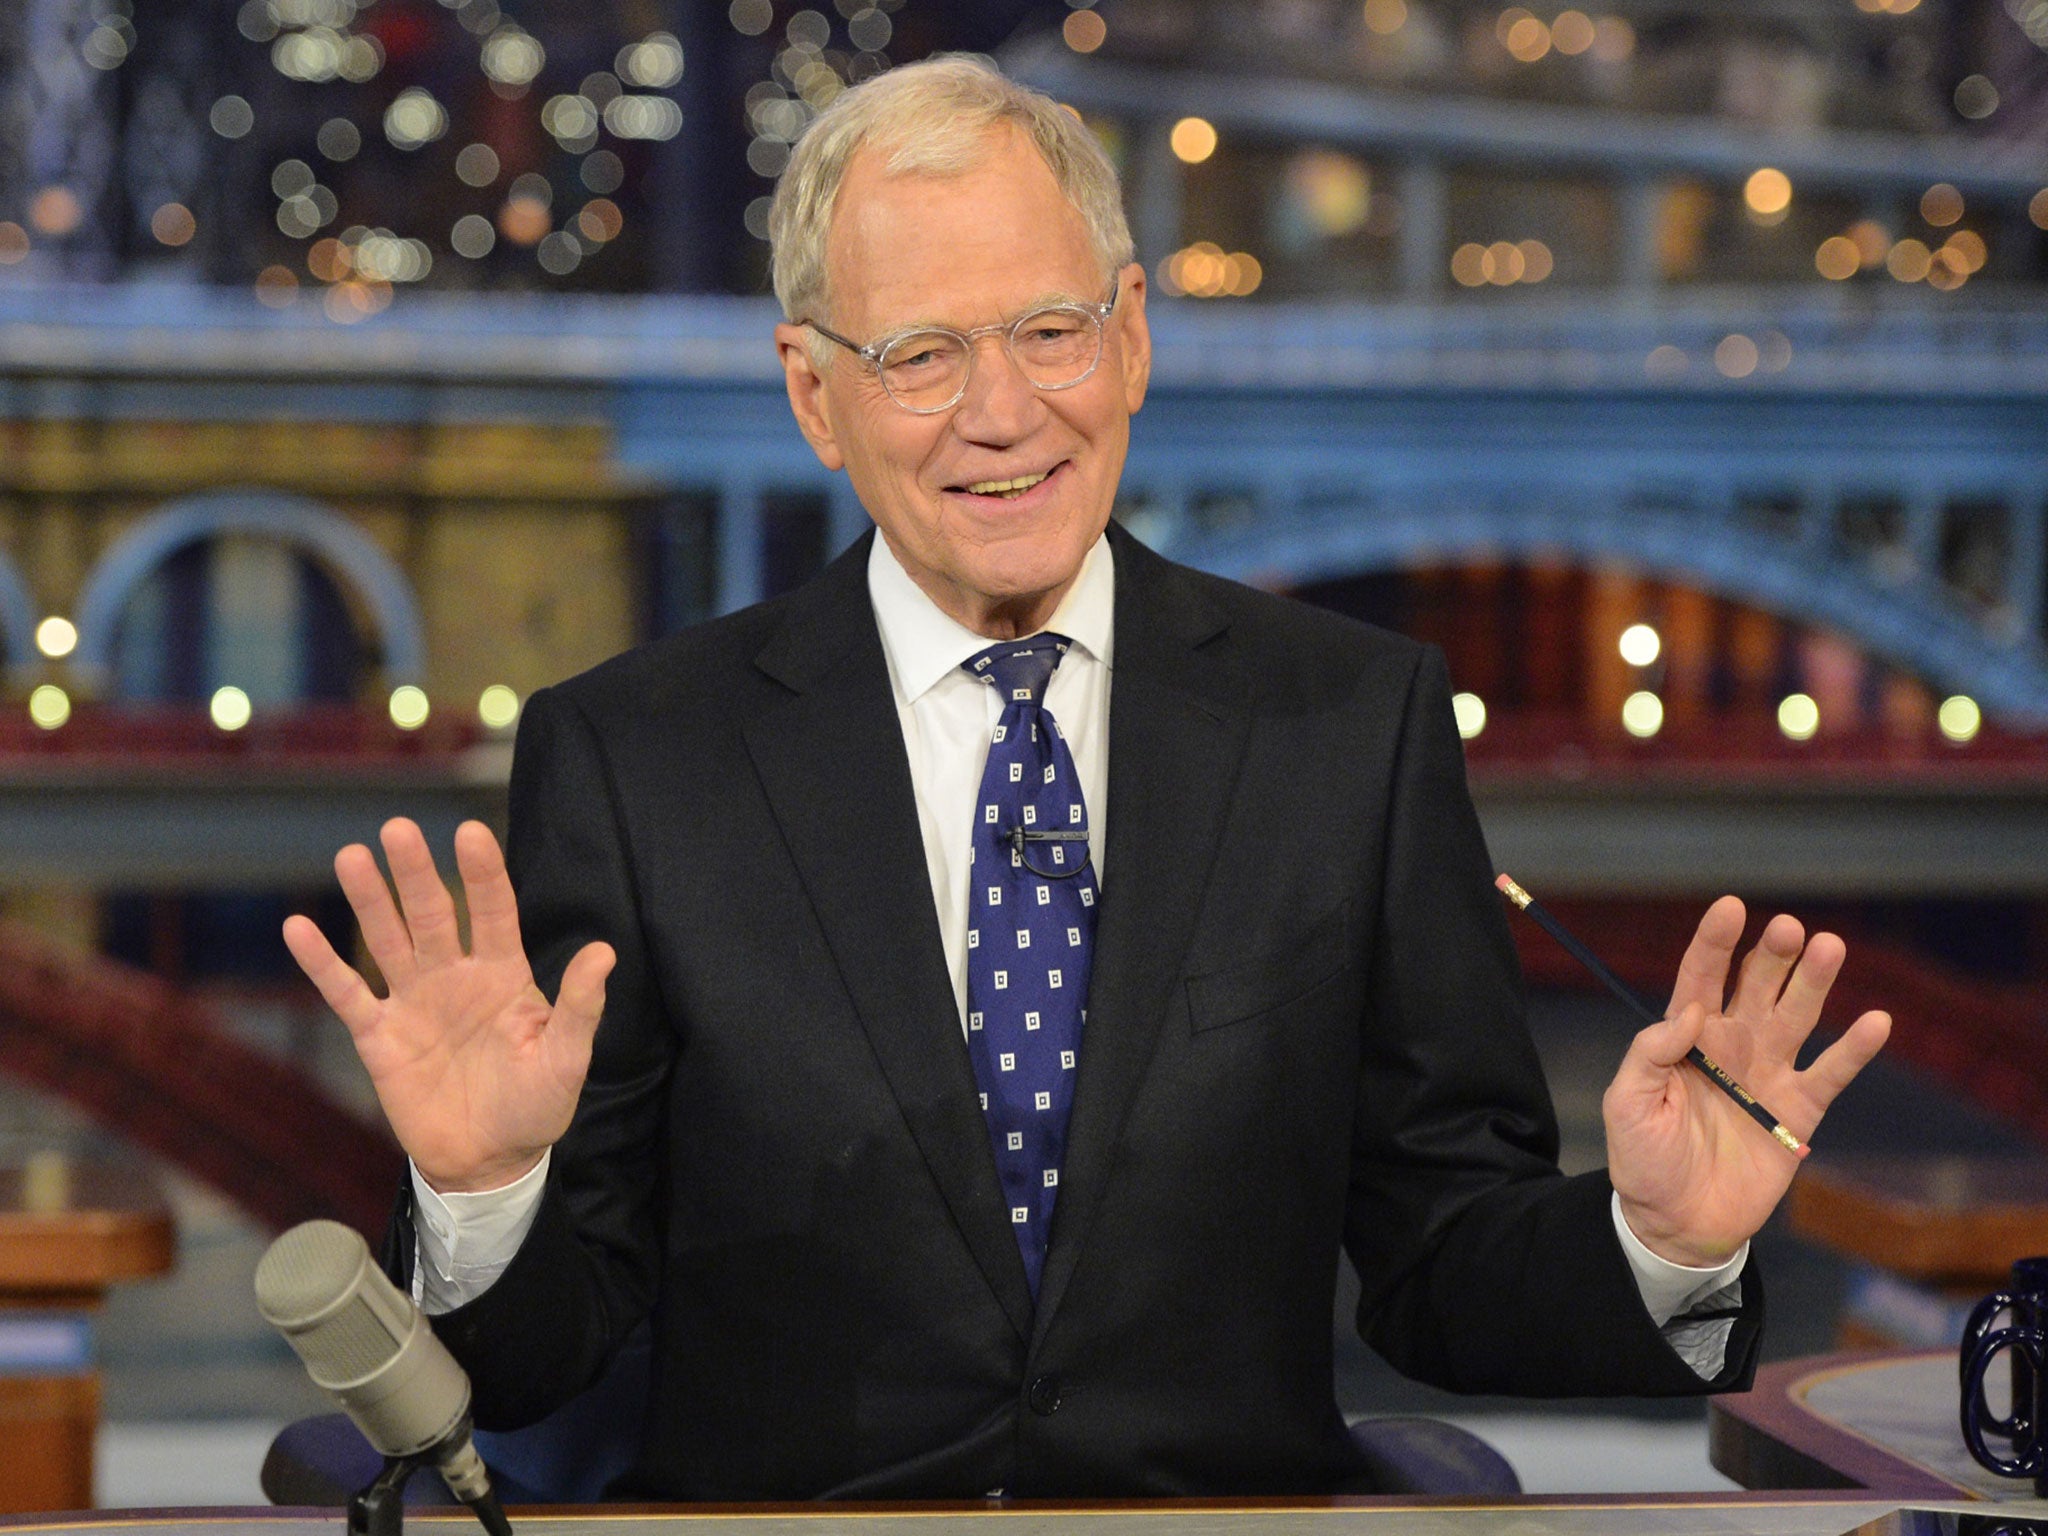 David Letterman took to the stage with Steve Martin and Martin Short